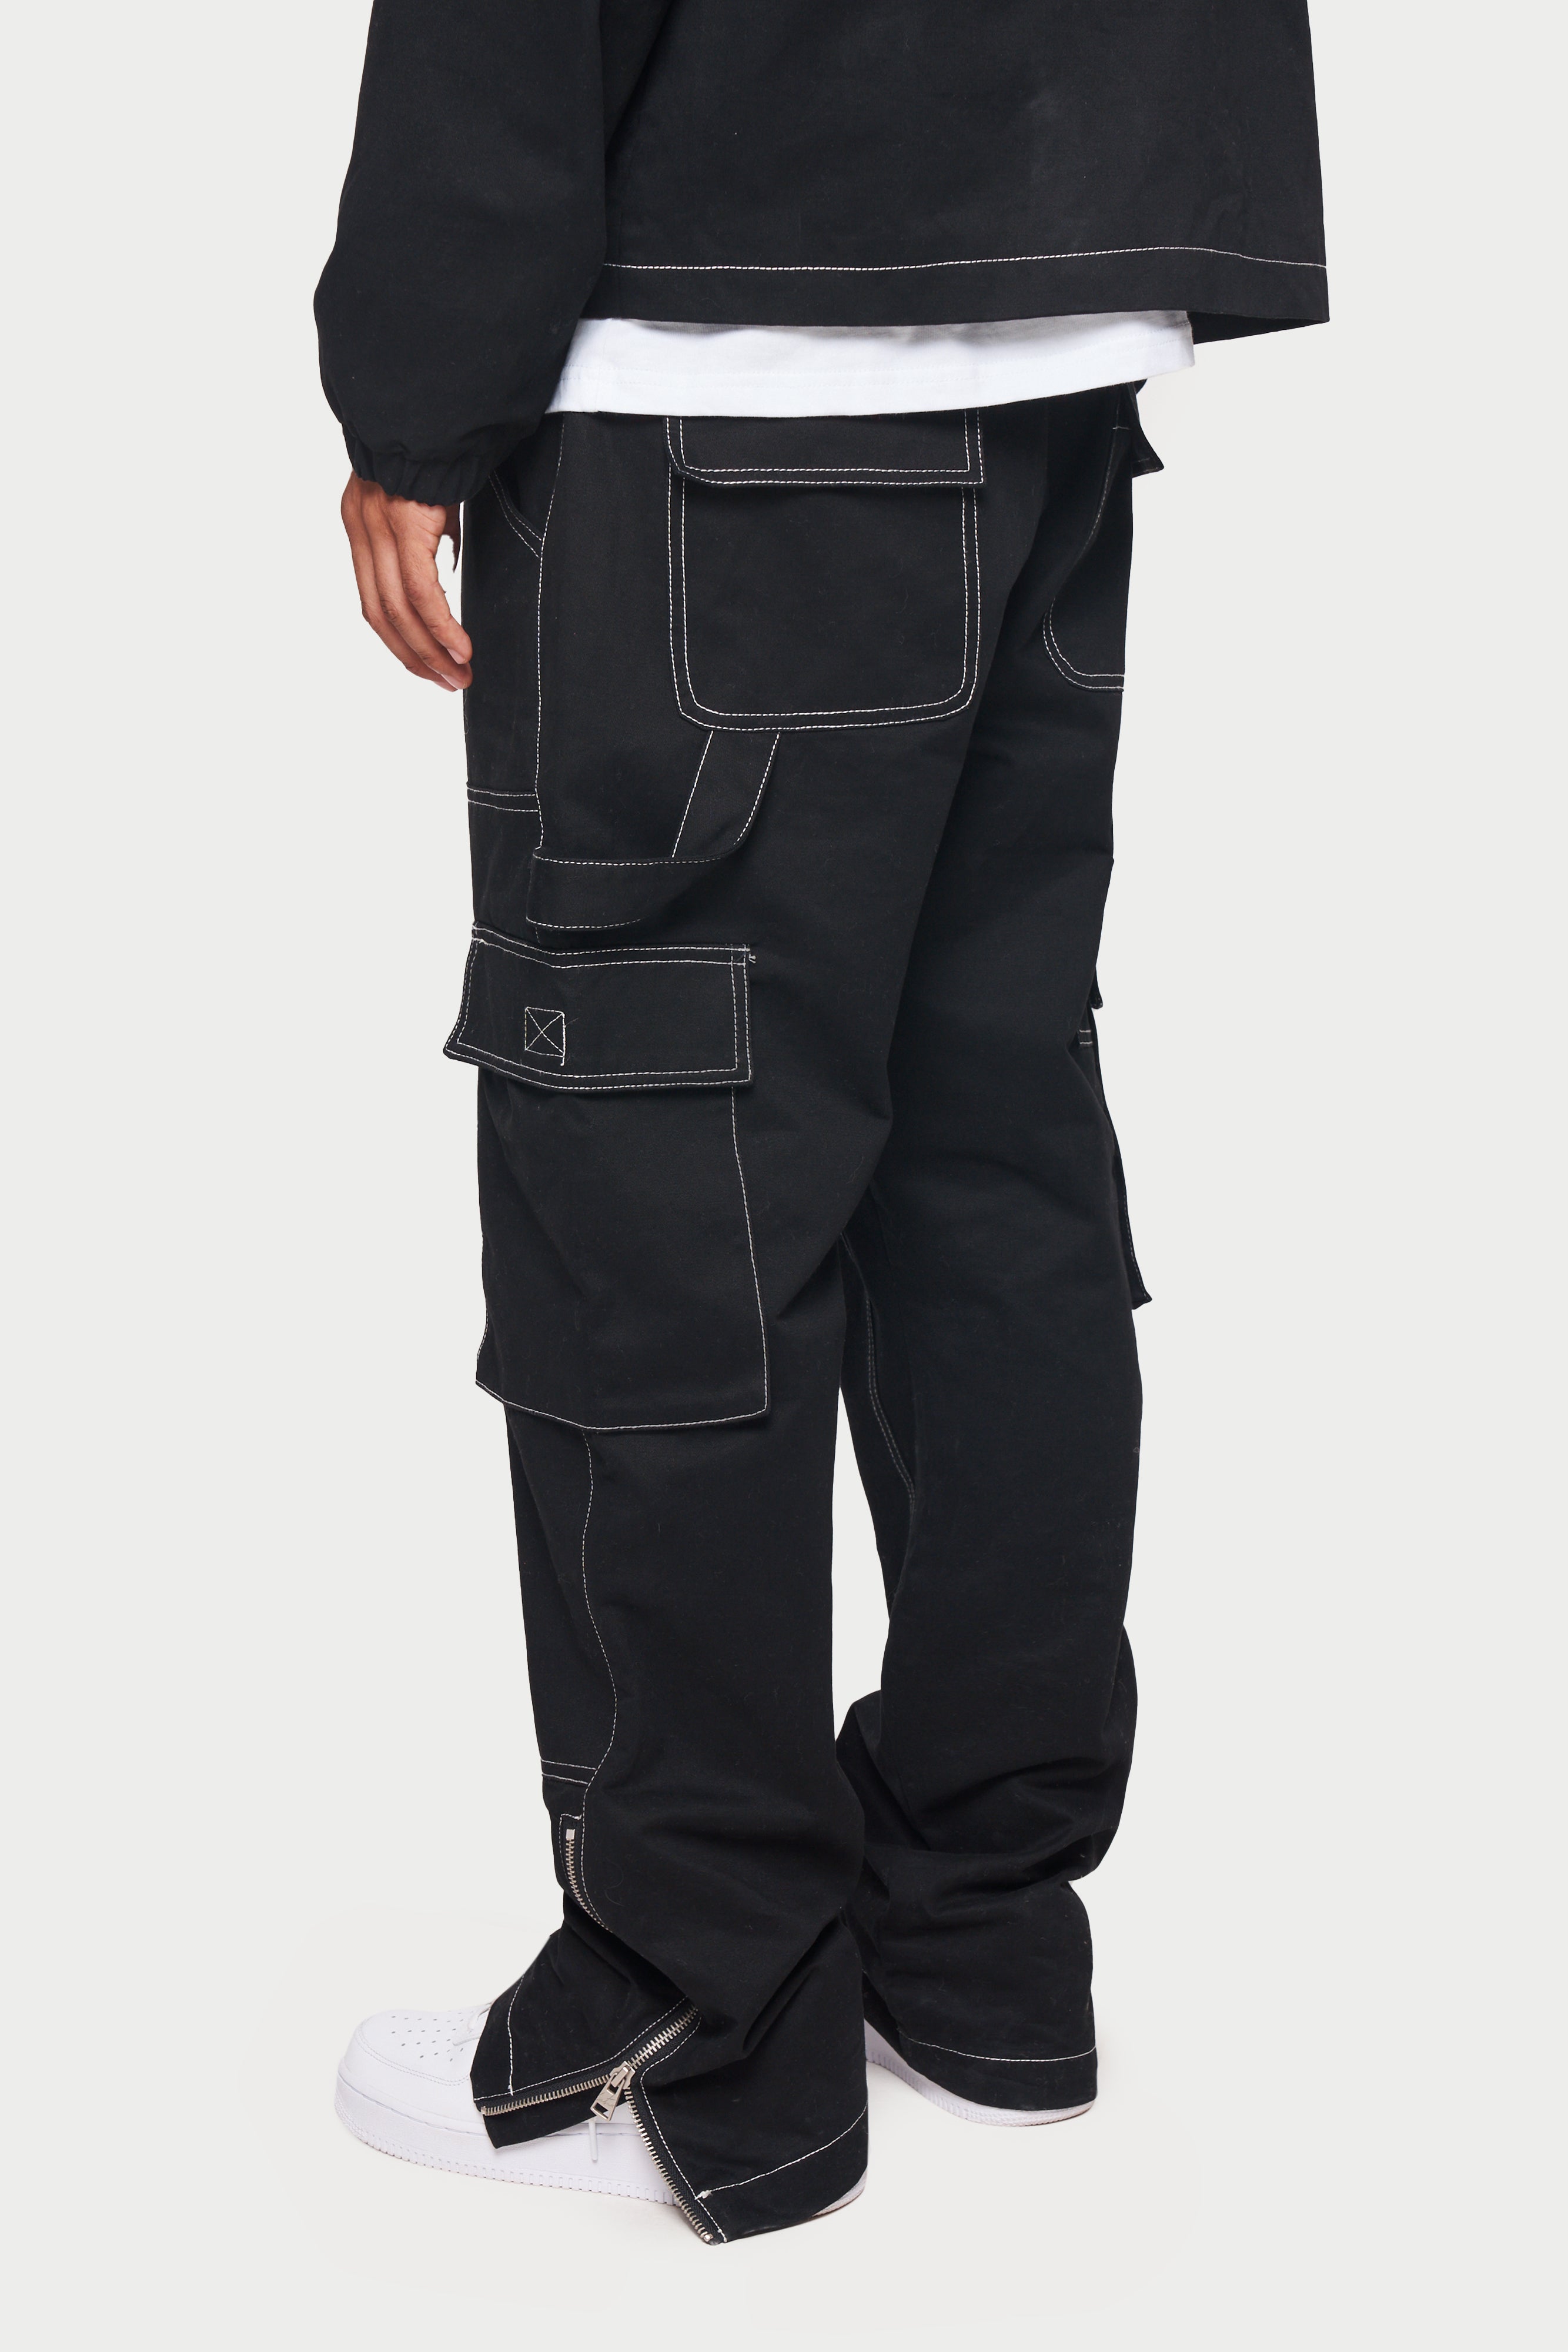 BDG Black Contrast Stitch LowRise Cargo Pants  Urban Outfitters UK